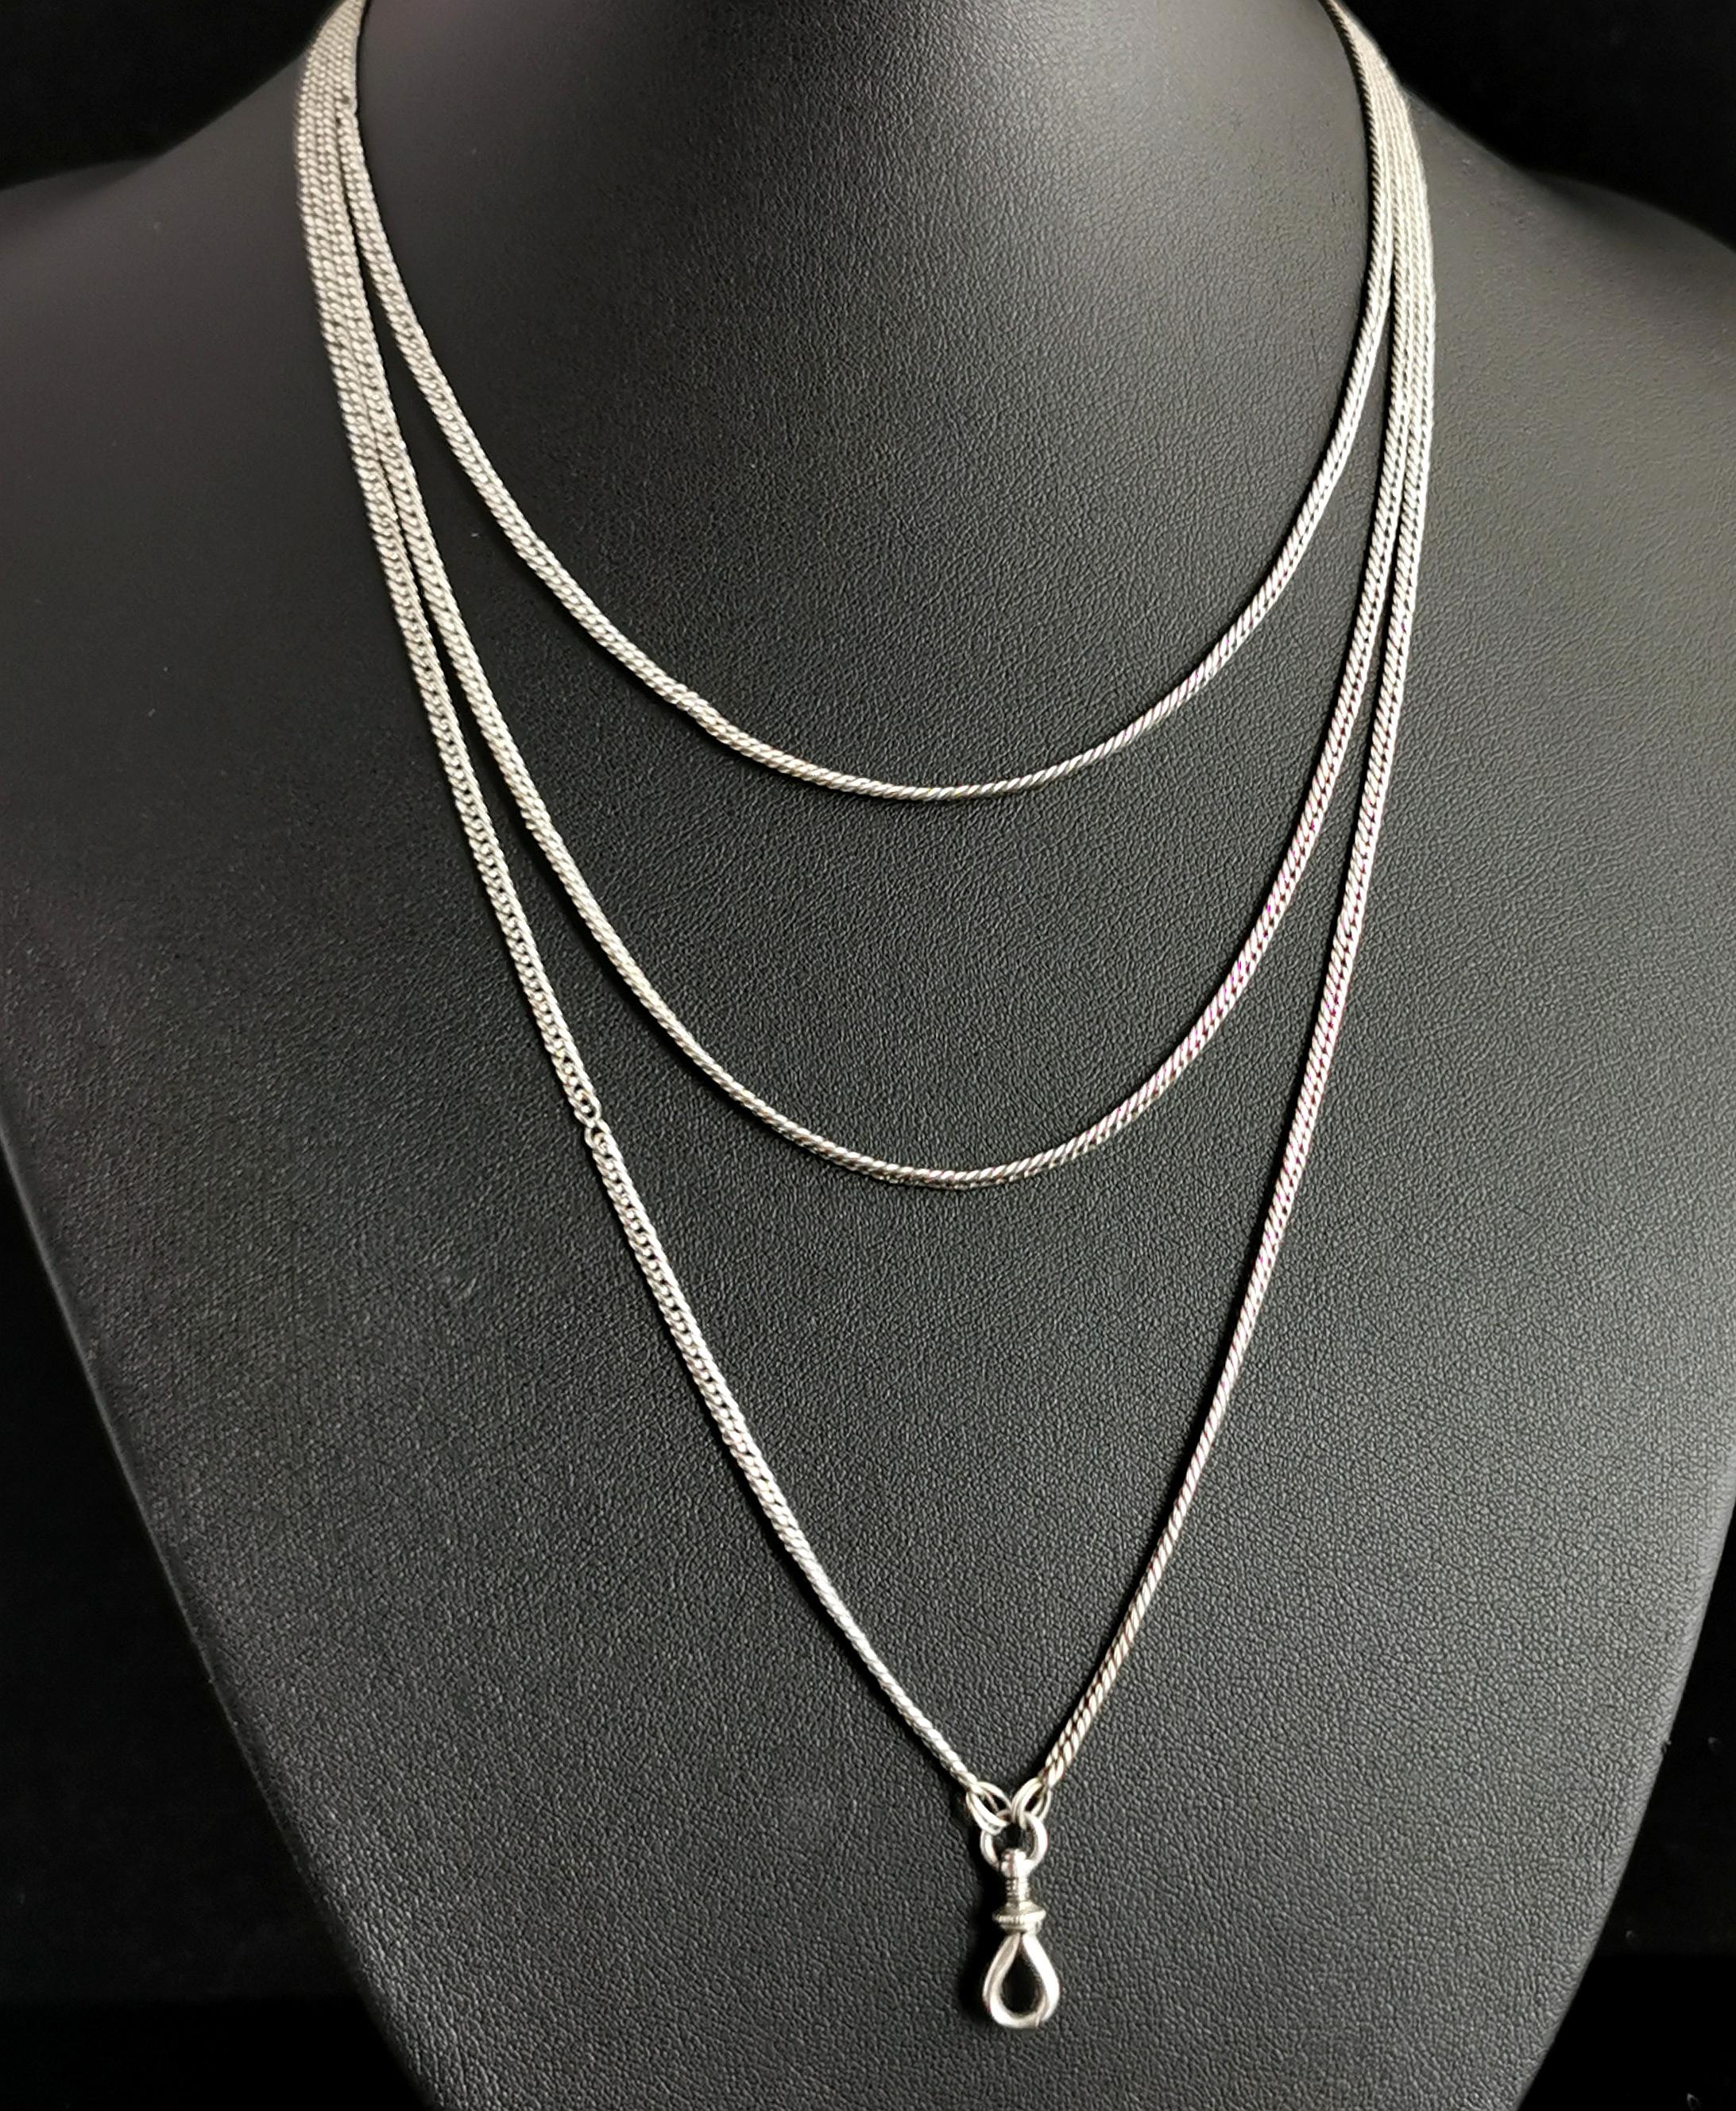 Antique Sterling Silver Longuard Chain Necklace, Muff Chain, Edwardian 6